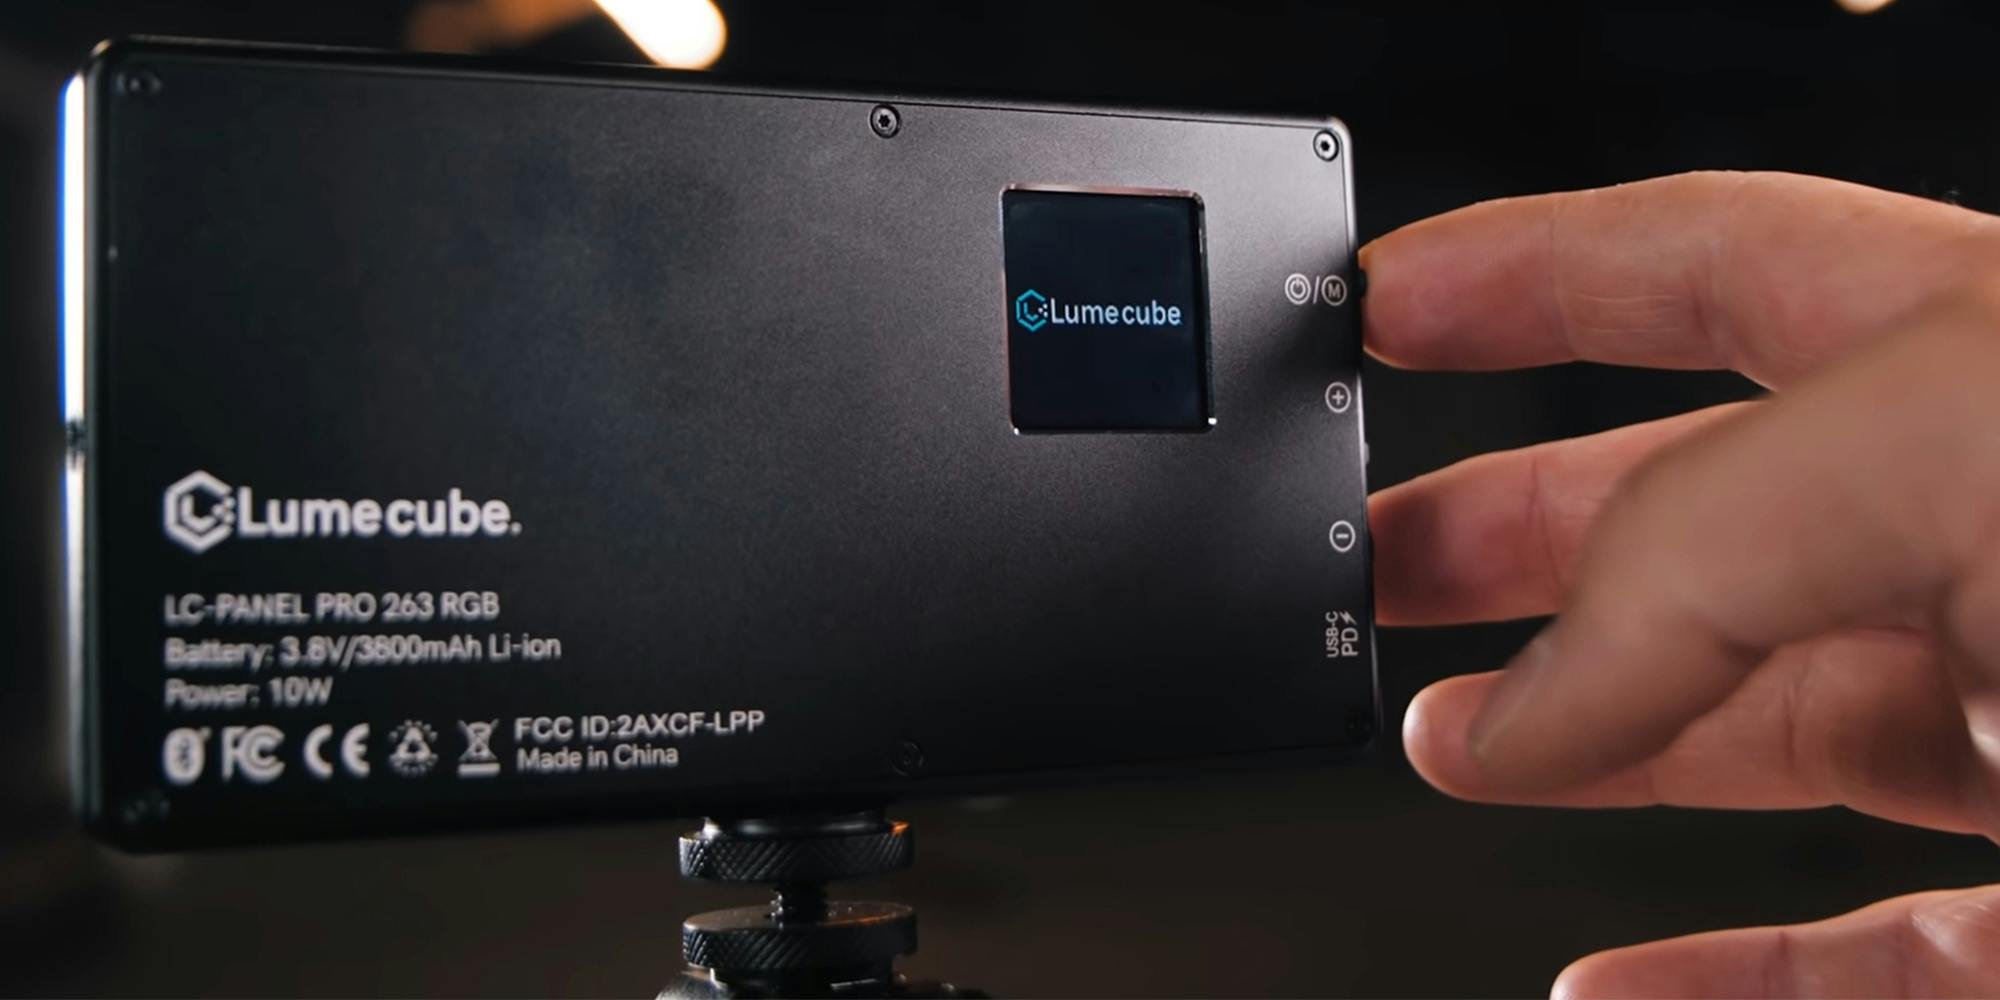 Used Gold: Why Lume Cube’s Refurbished RBG Panel Pro Is A Budget Creators Dream